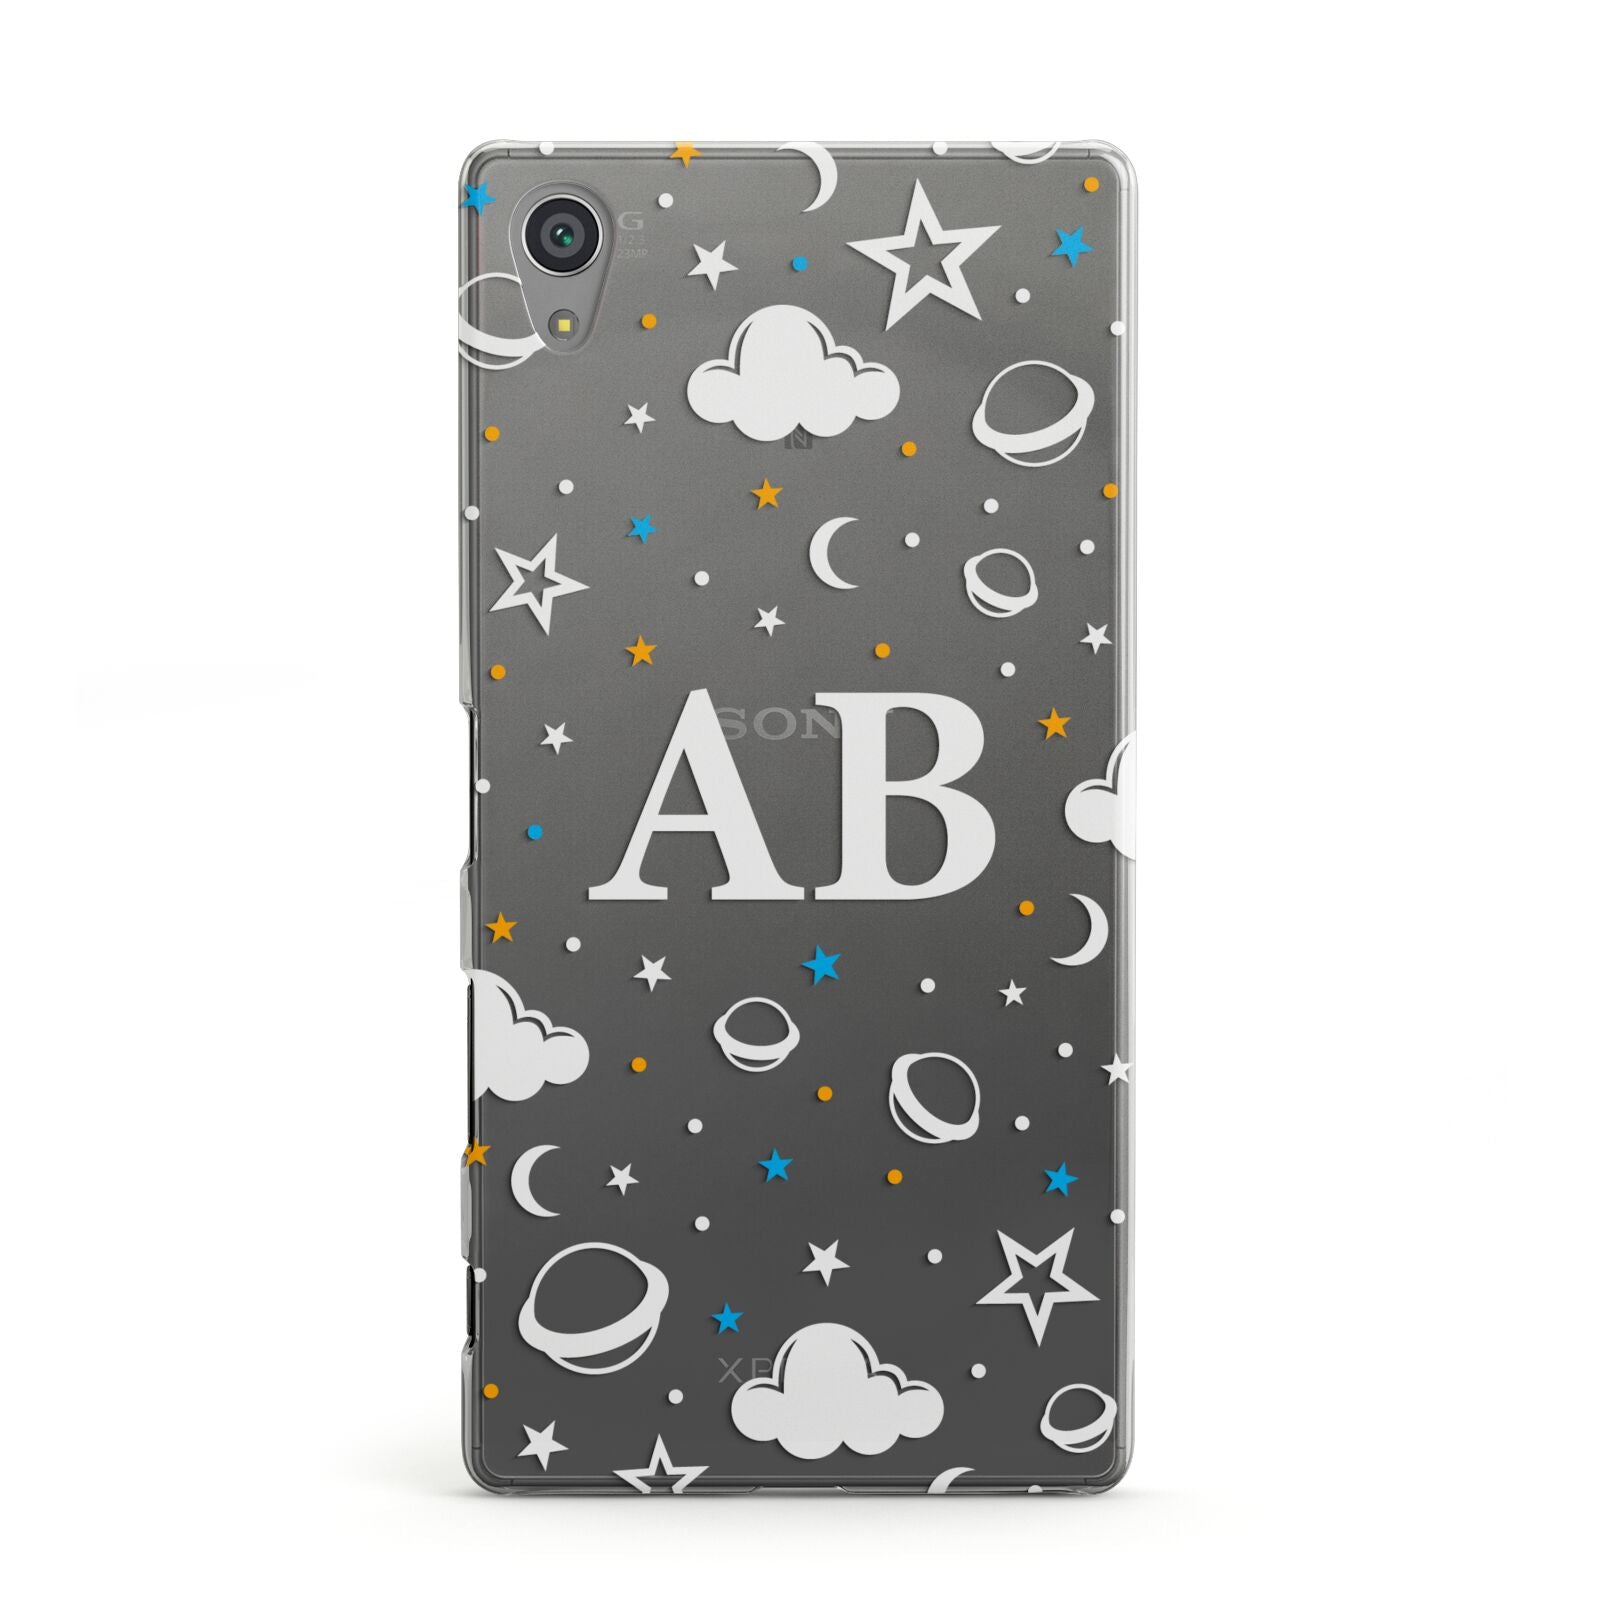 Astronomical Initials Sony Xperia Case